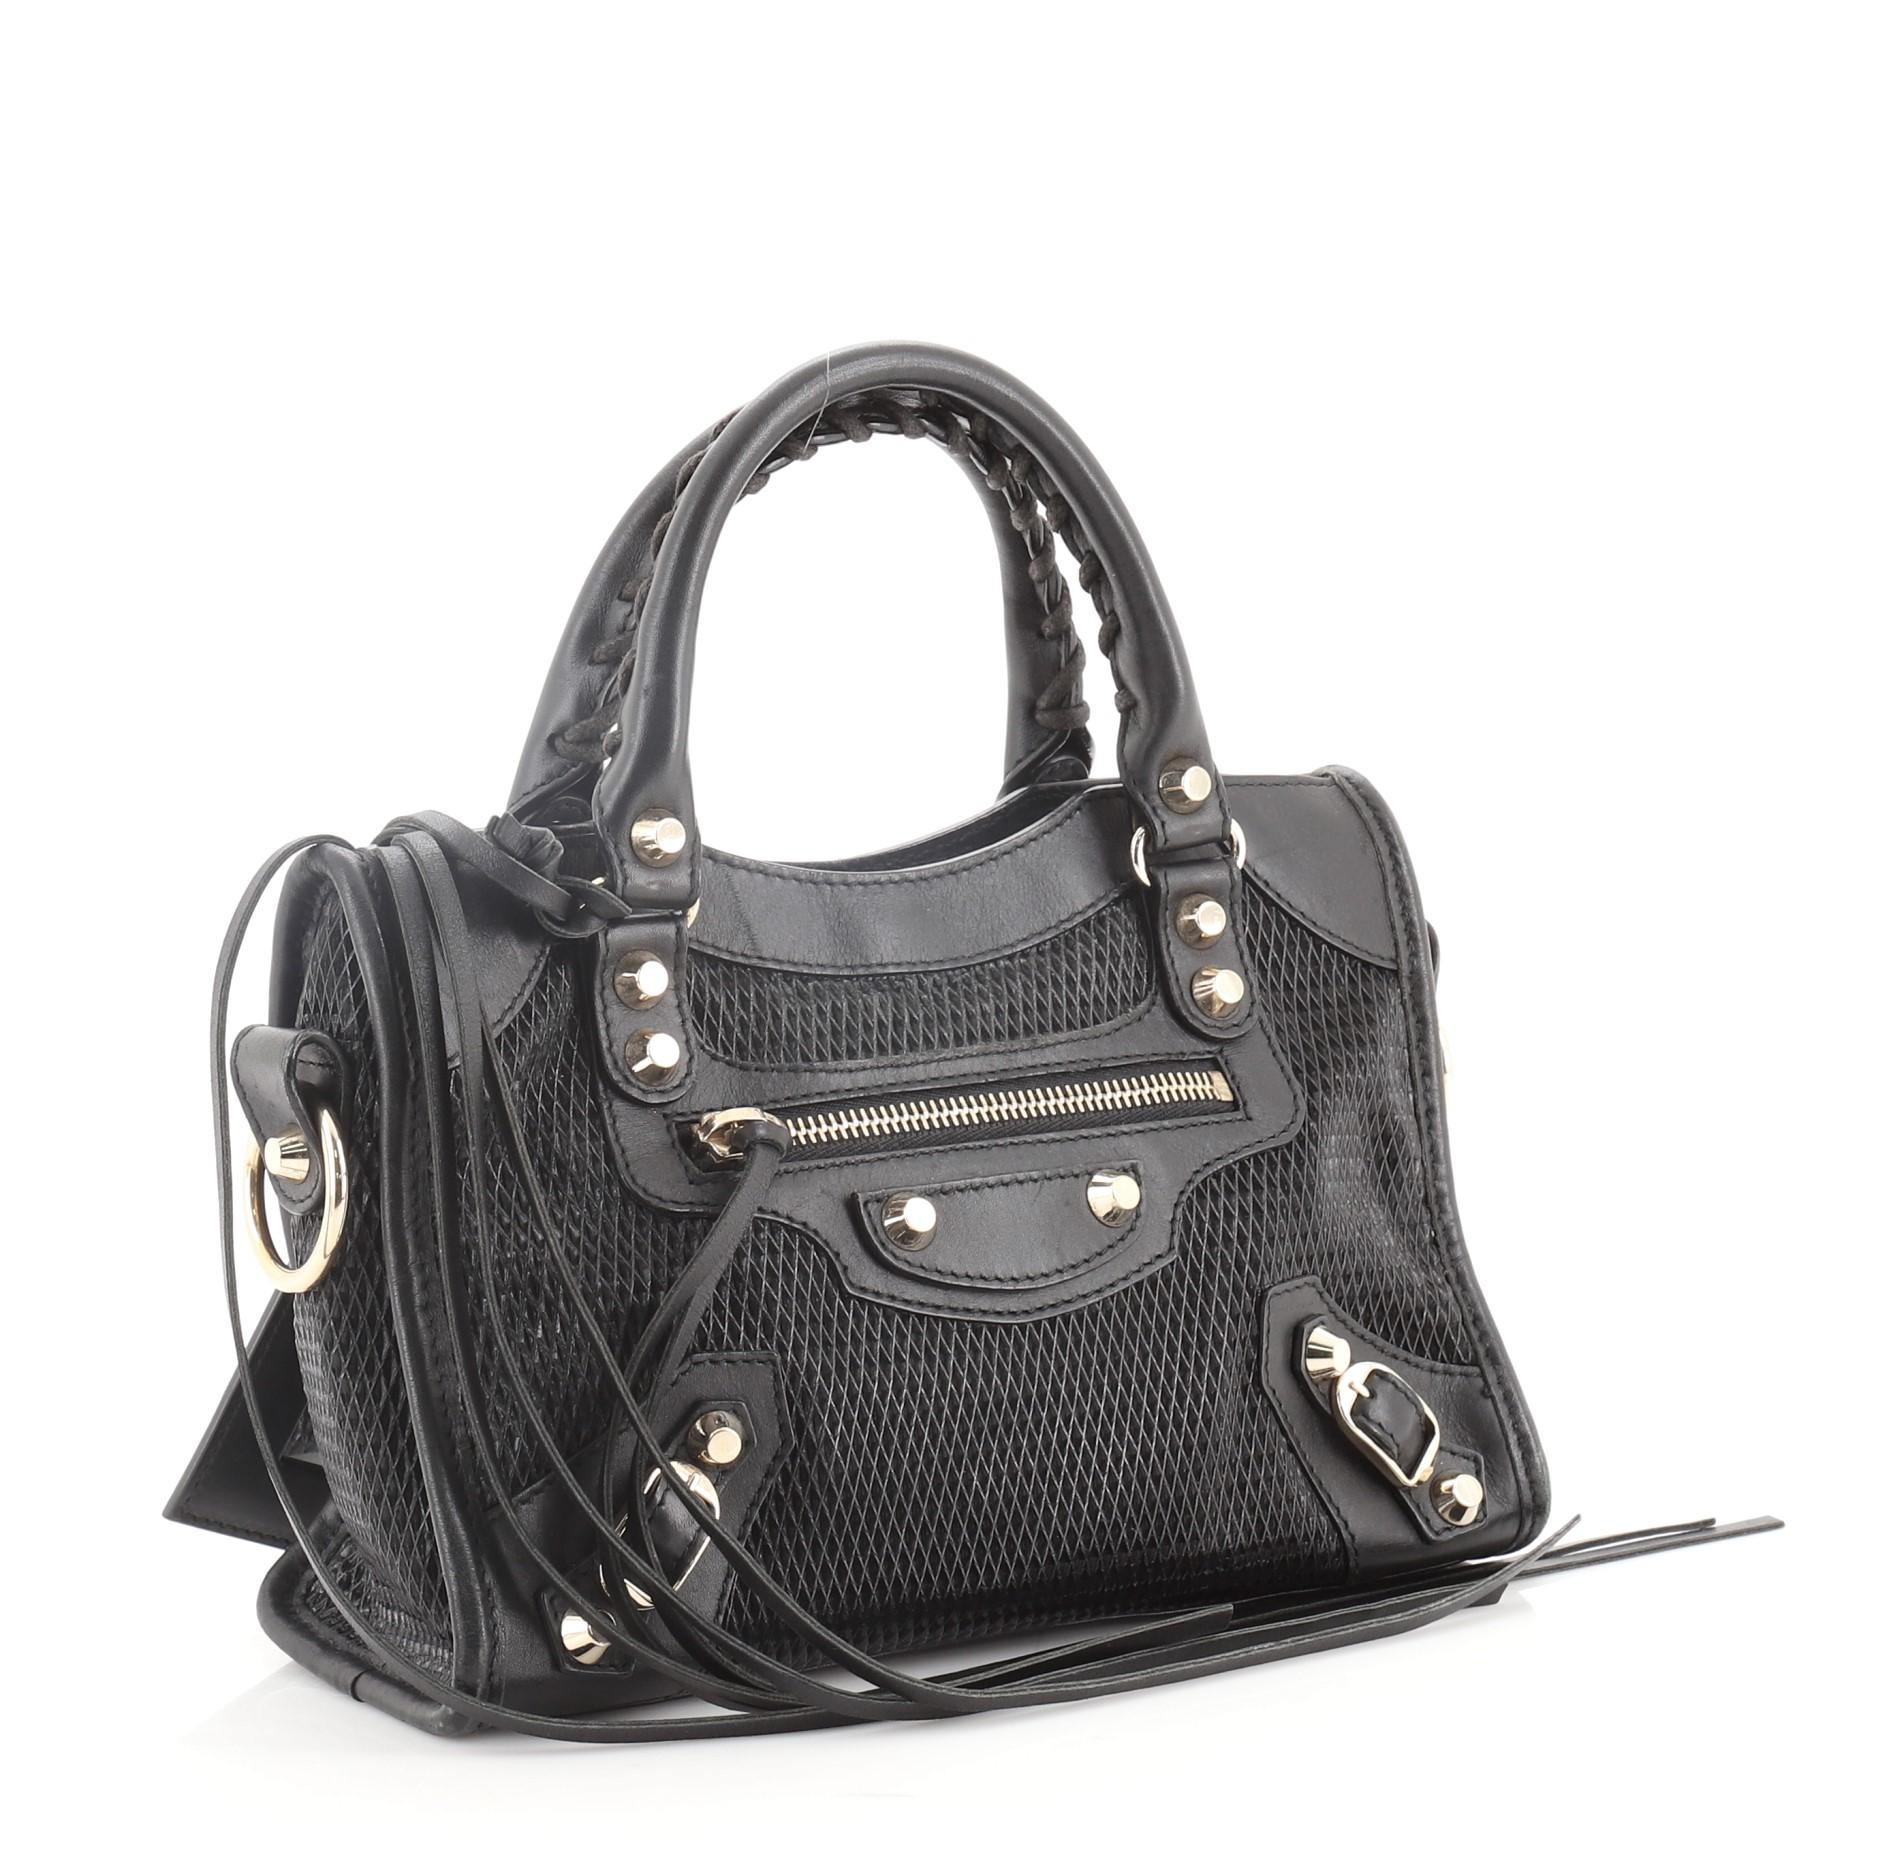 Balenciaga City Classic Studs Bag Perforated Leather Mini
Black Perforated Leather

Condition Details: Creasing on base, moderate wear, scuffs, and discoloration on exterior, handles, strap and in interior. Cracking on handle and opening trim corner